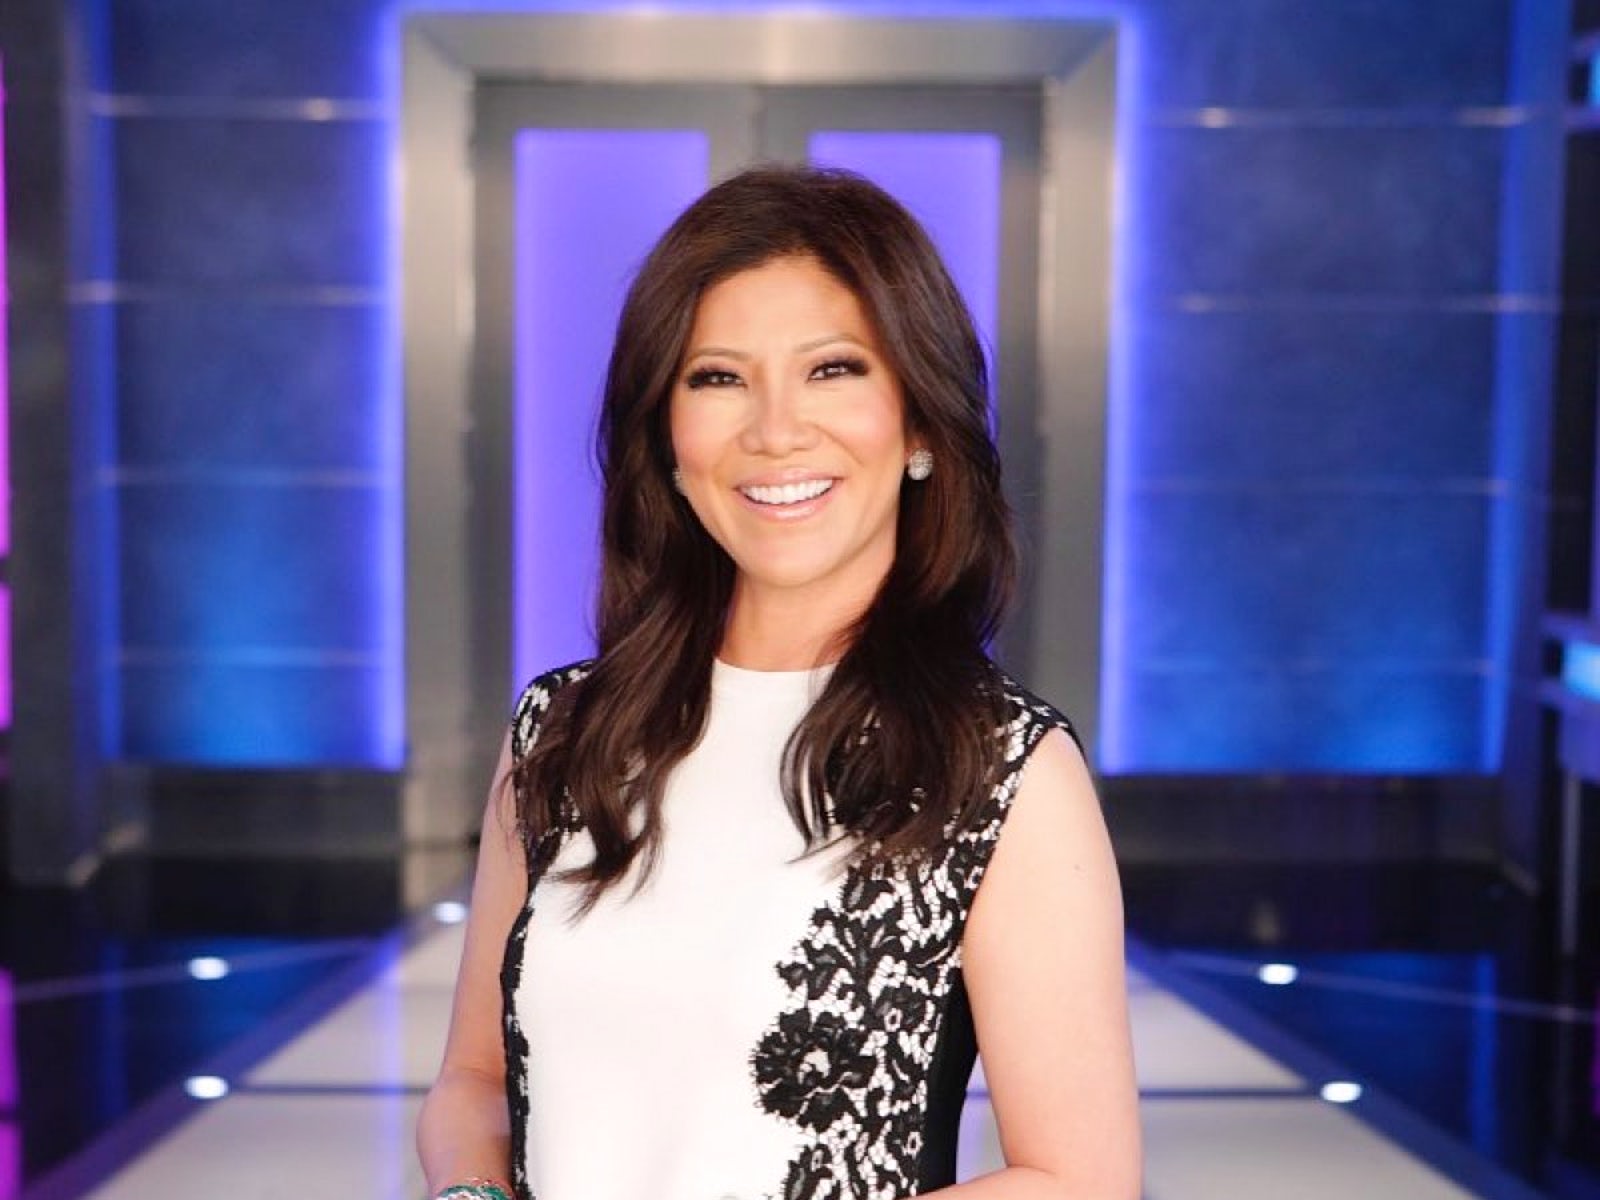 'Big Brother' host Julie Chen predicts Season 20's winner and reveals